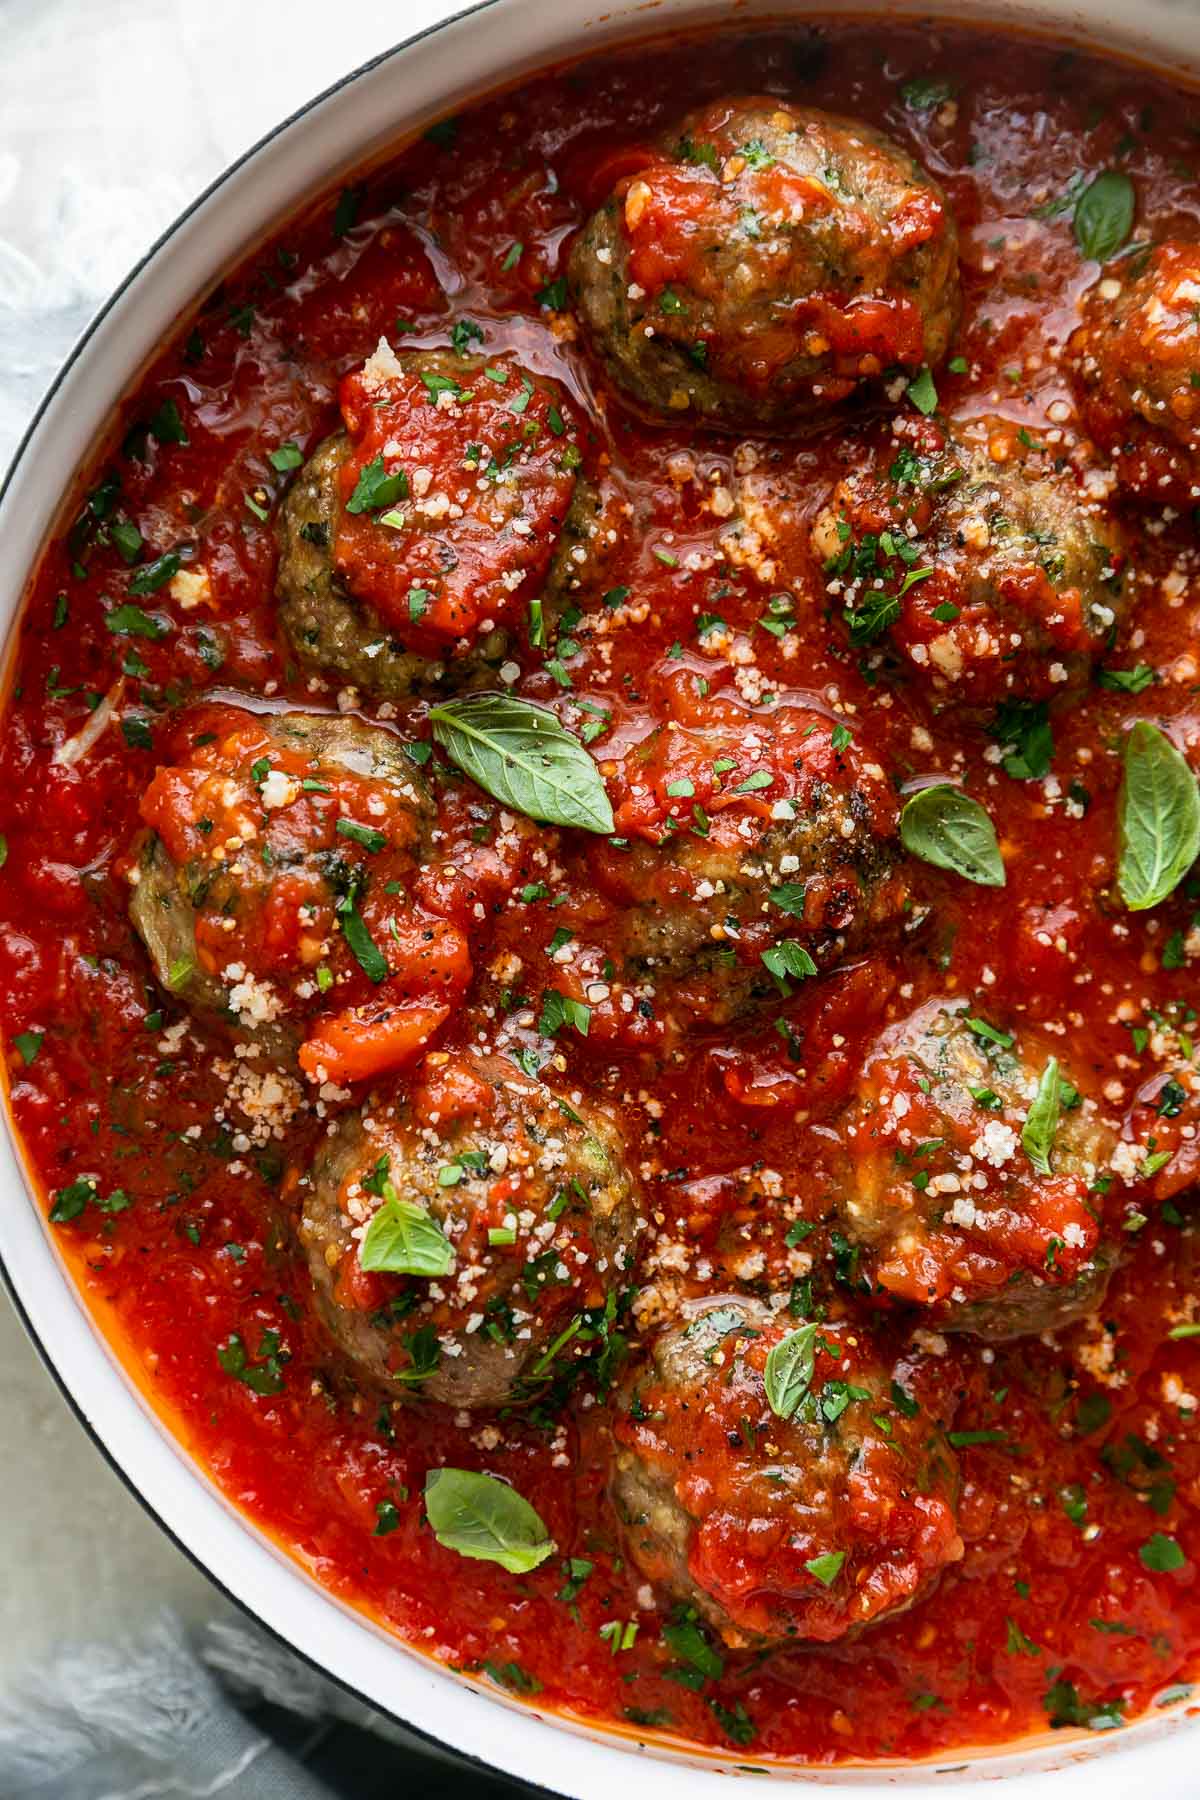 Mozzarella Stuffed Chicken Parmesan Meatballs simmer in a red tomato sauce in a large white skillet. The meatballs have been garnished with chopped basil and grated parmesan and the skillet sits atop a creamy white textured surface with a light blue linen napkin tucked underneath the skillet.